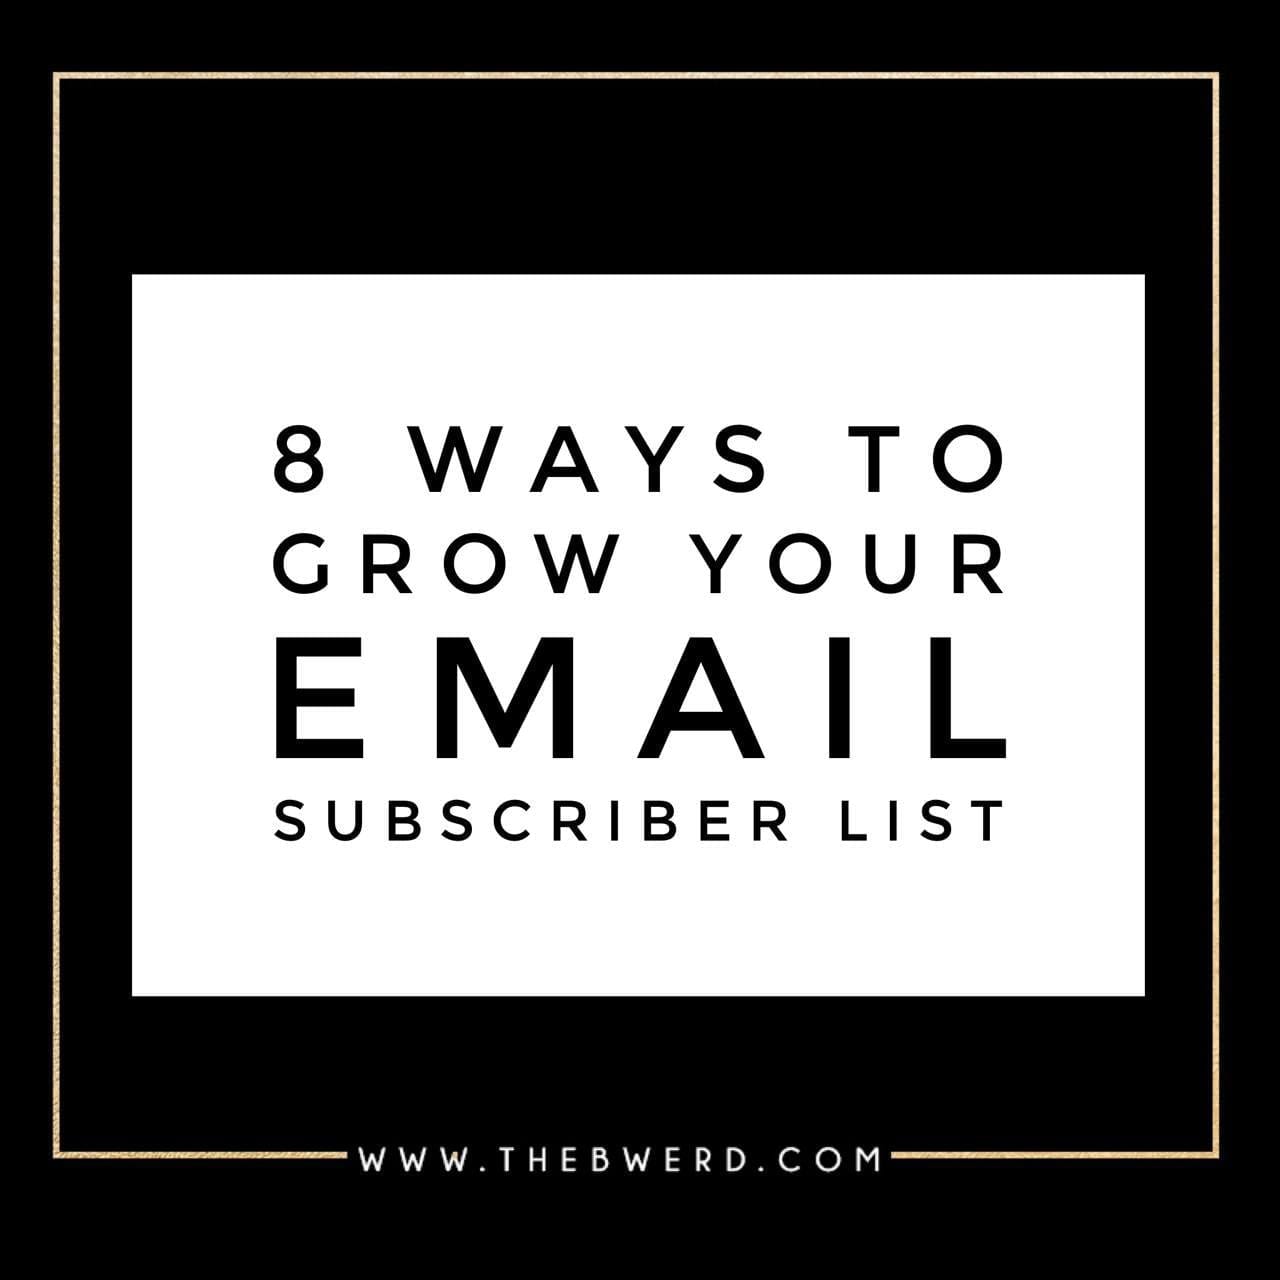 8 Ways to Grow Your Email Subscriber List | The B Werd